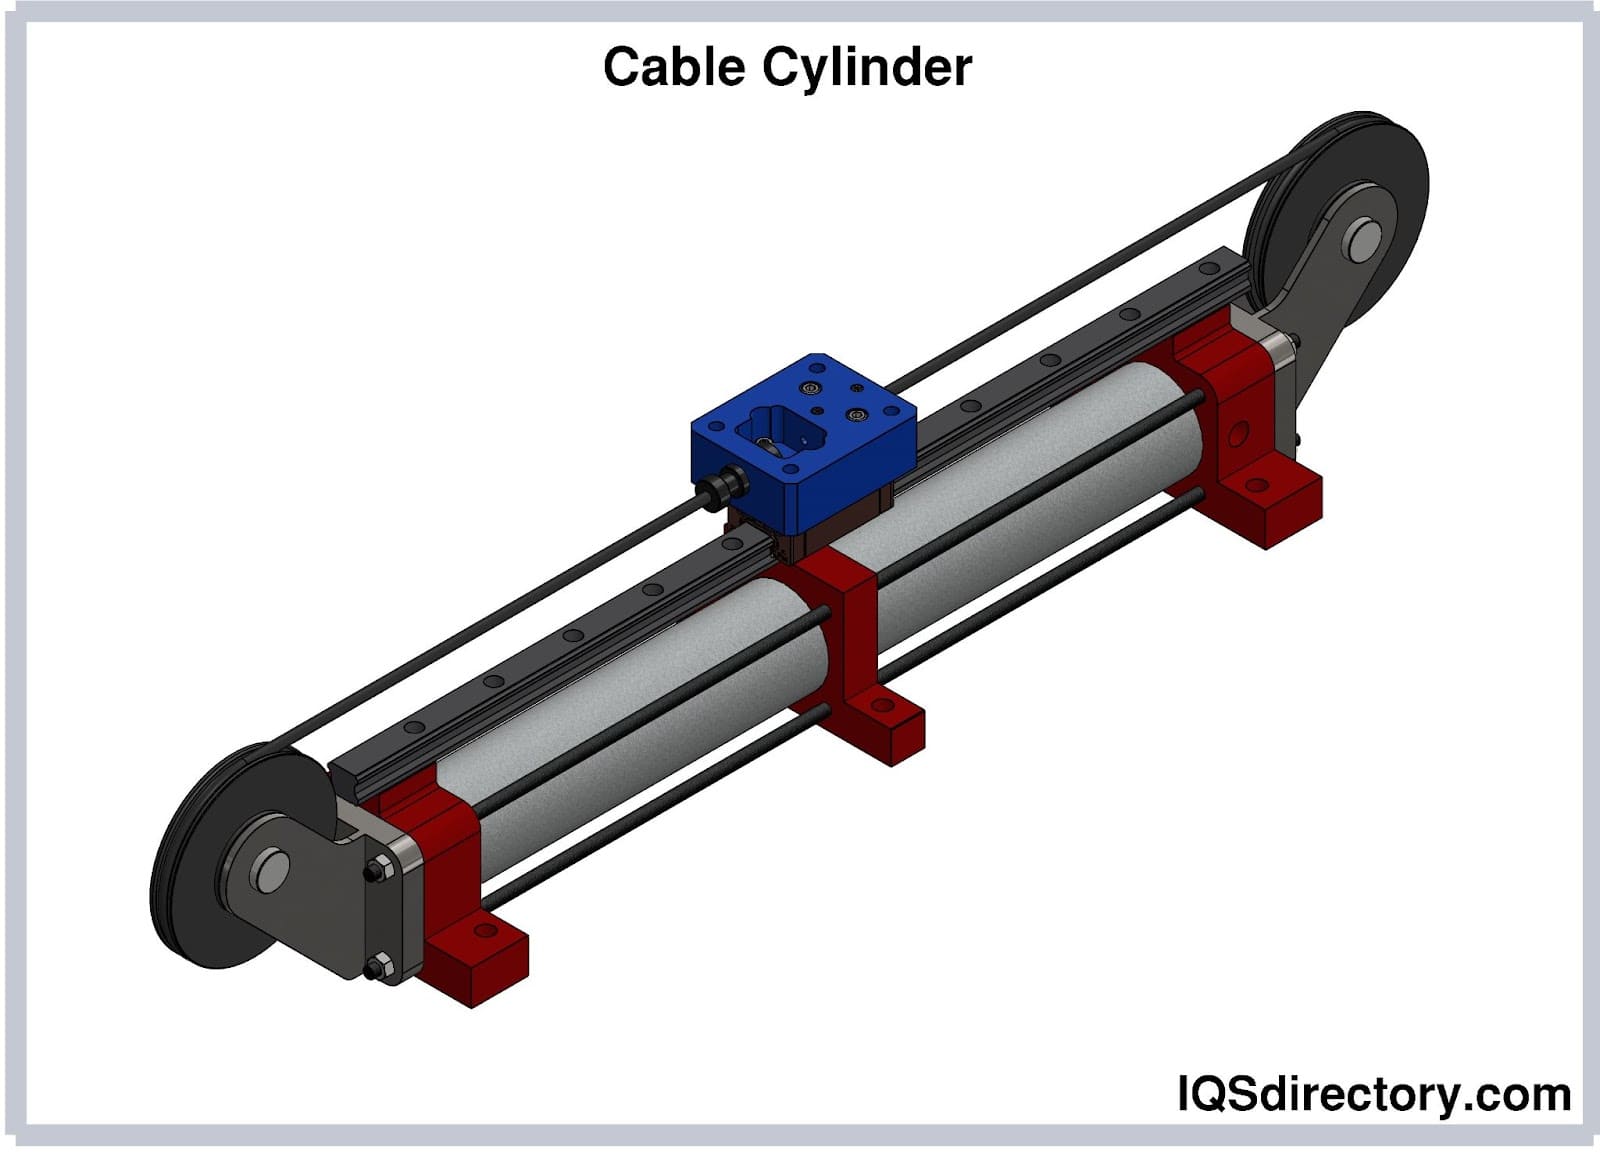 Cable Cylinder